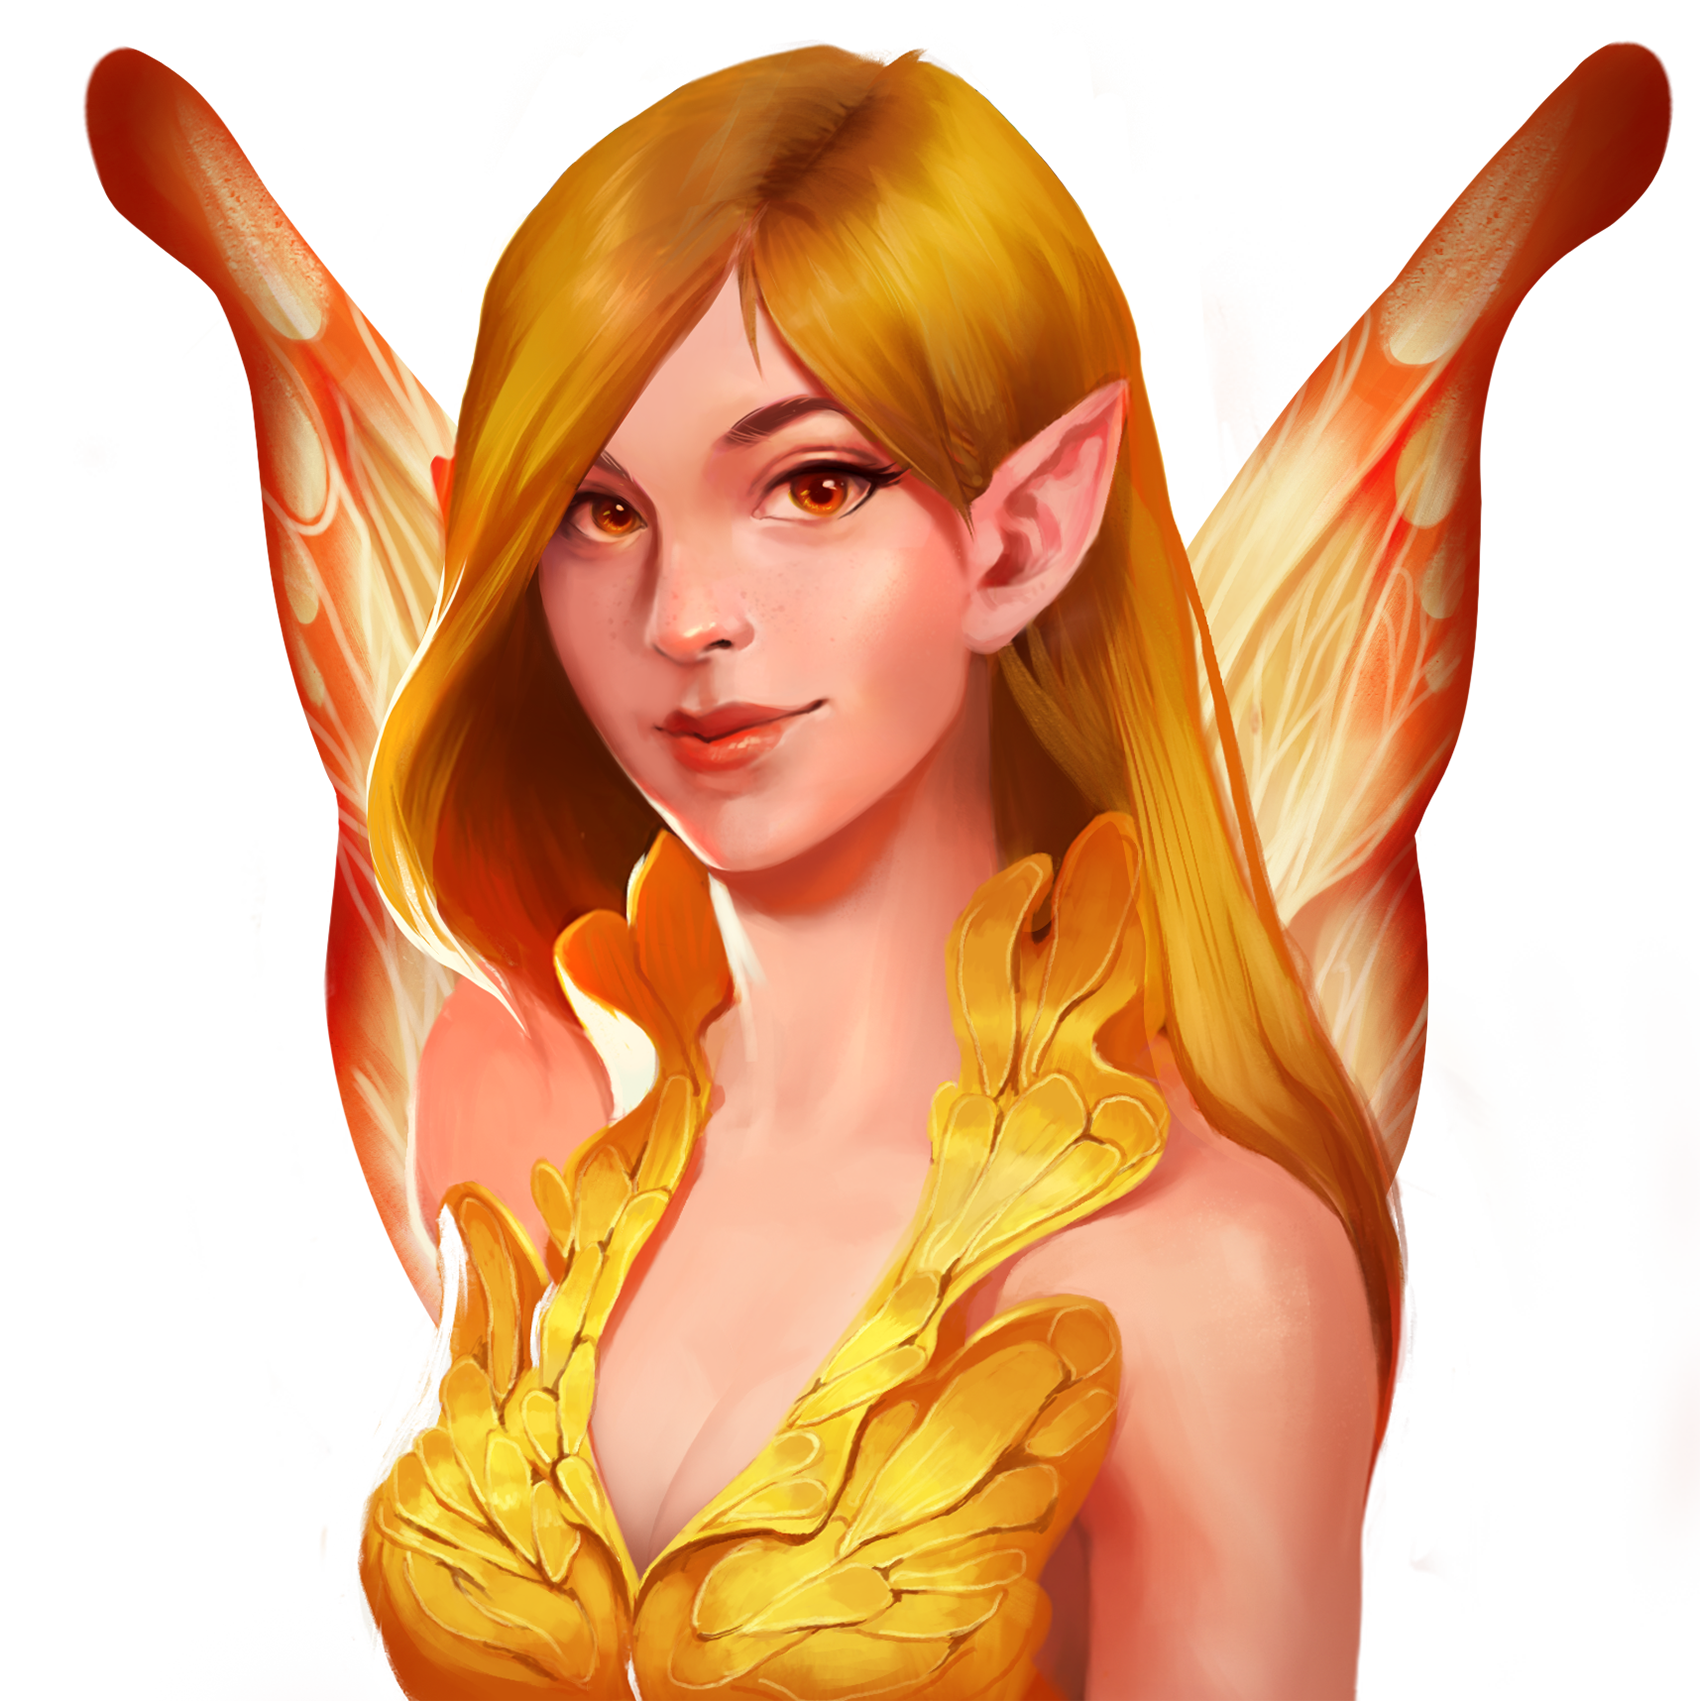 15_character_sym4 yellow fairy_wingsofriches.png thumbnail